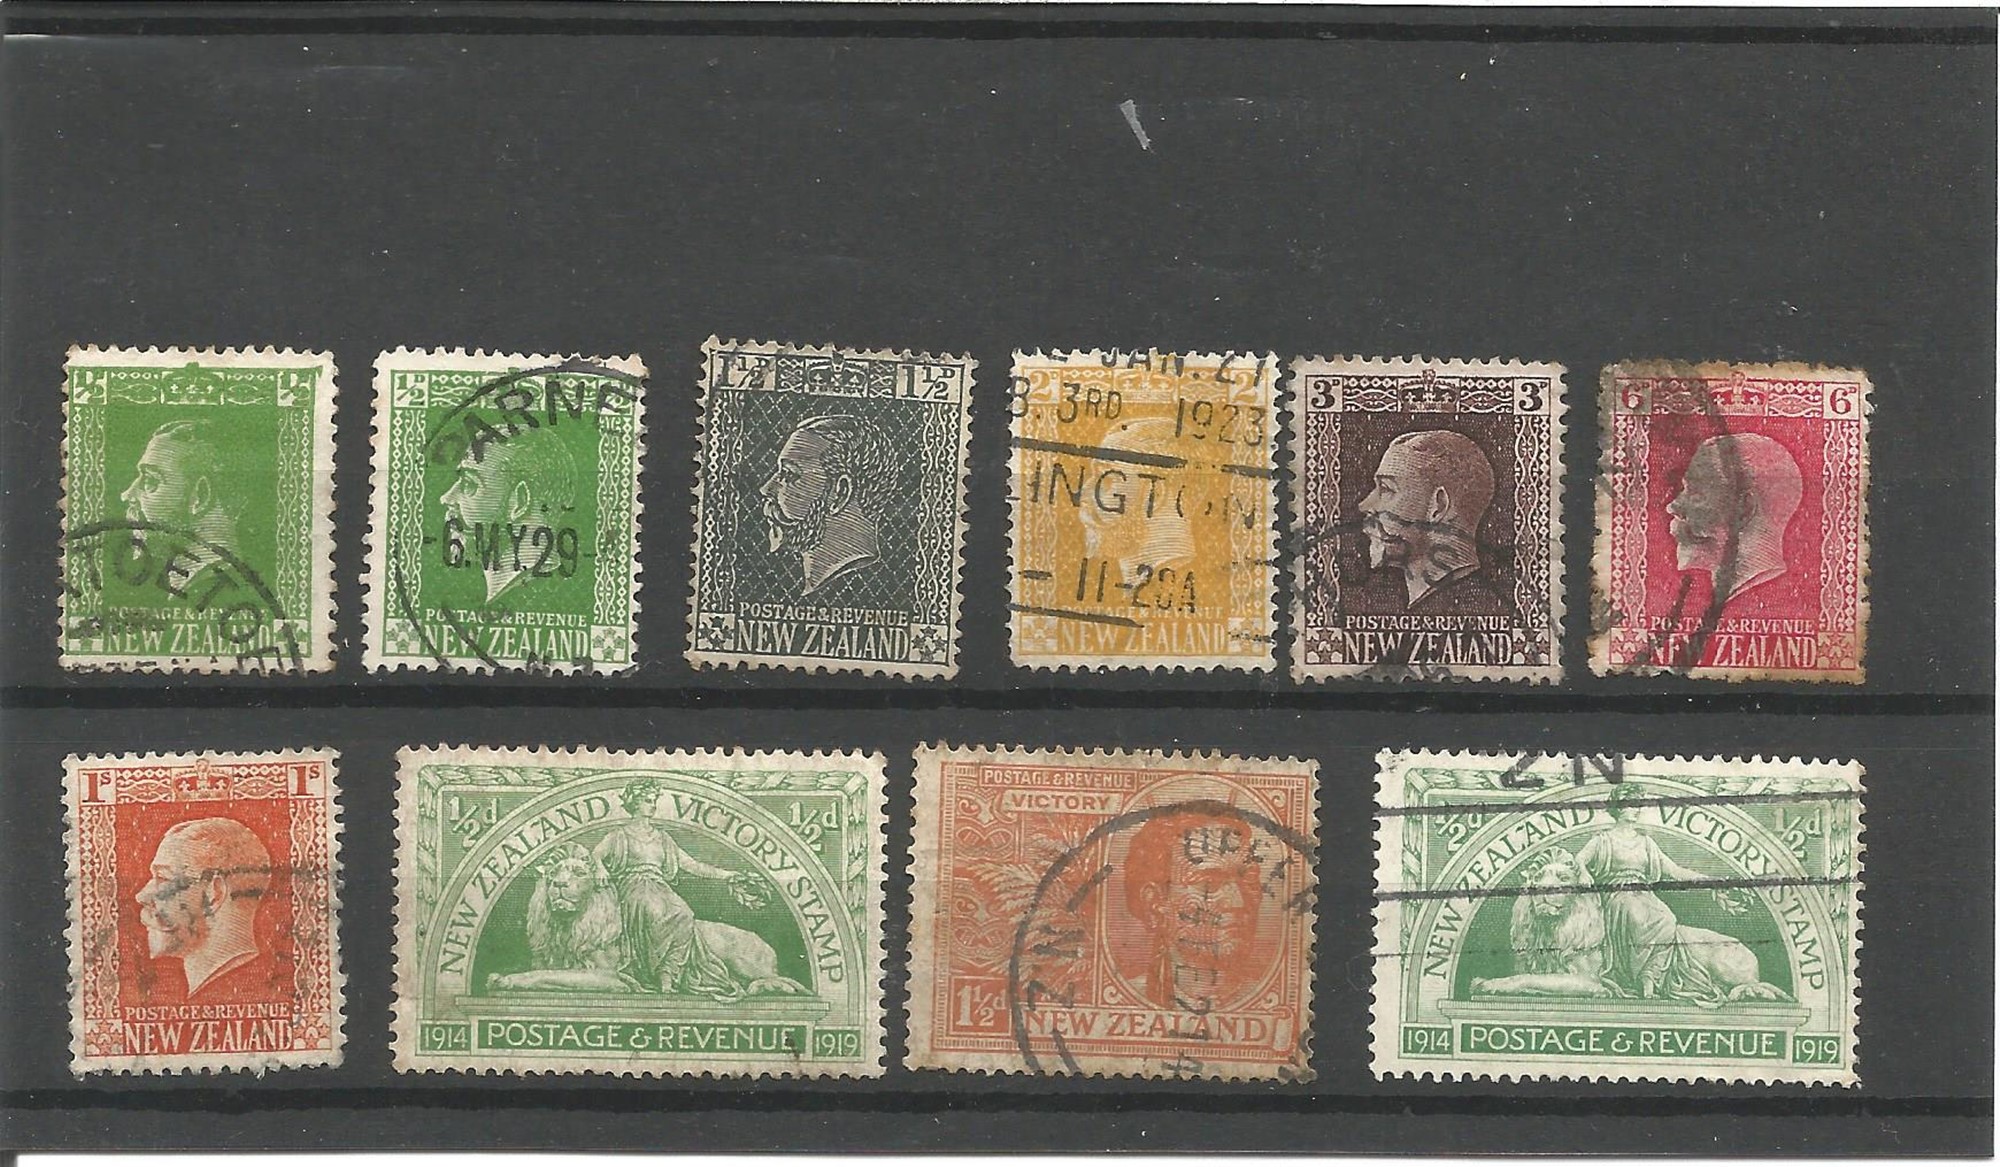 New Zealand pre 1915 stamps on stockcard. 10 stamps. Good condition. We combine postage on - Image 2 of 3